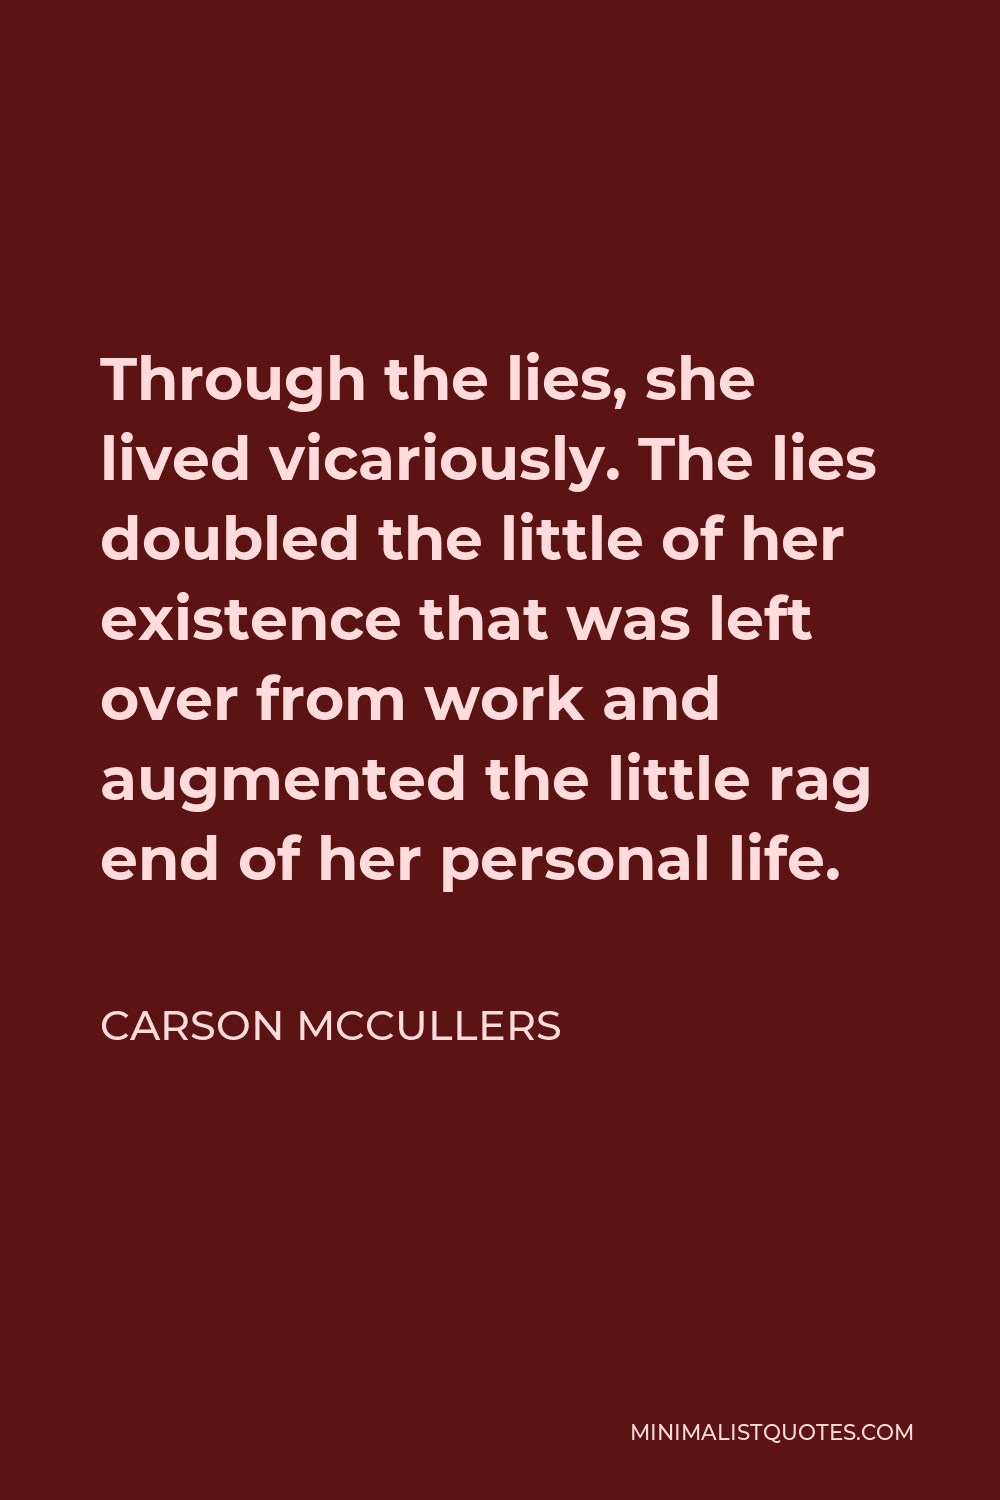 Carson McCullers Quote - Through the lies, she lived vicariously. The lies doubled the little of her existence that was left over from work and augmented the little rag end of her personal life.